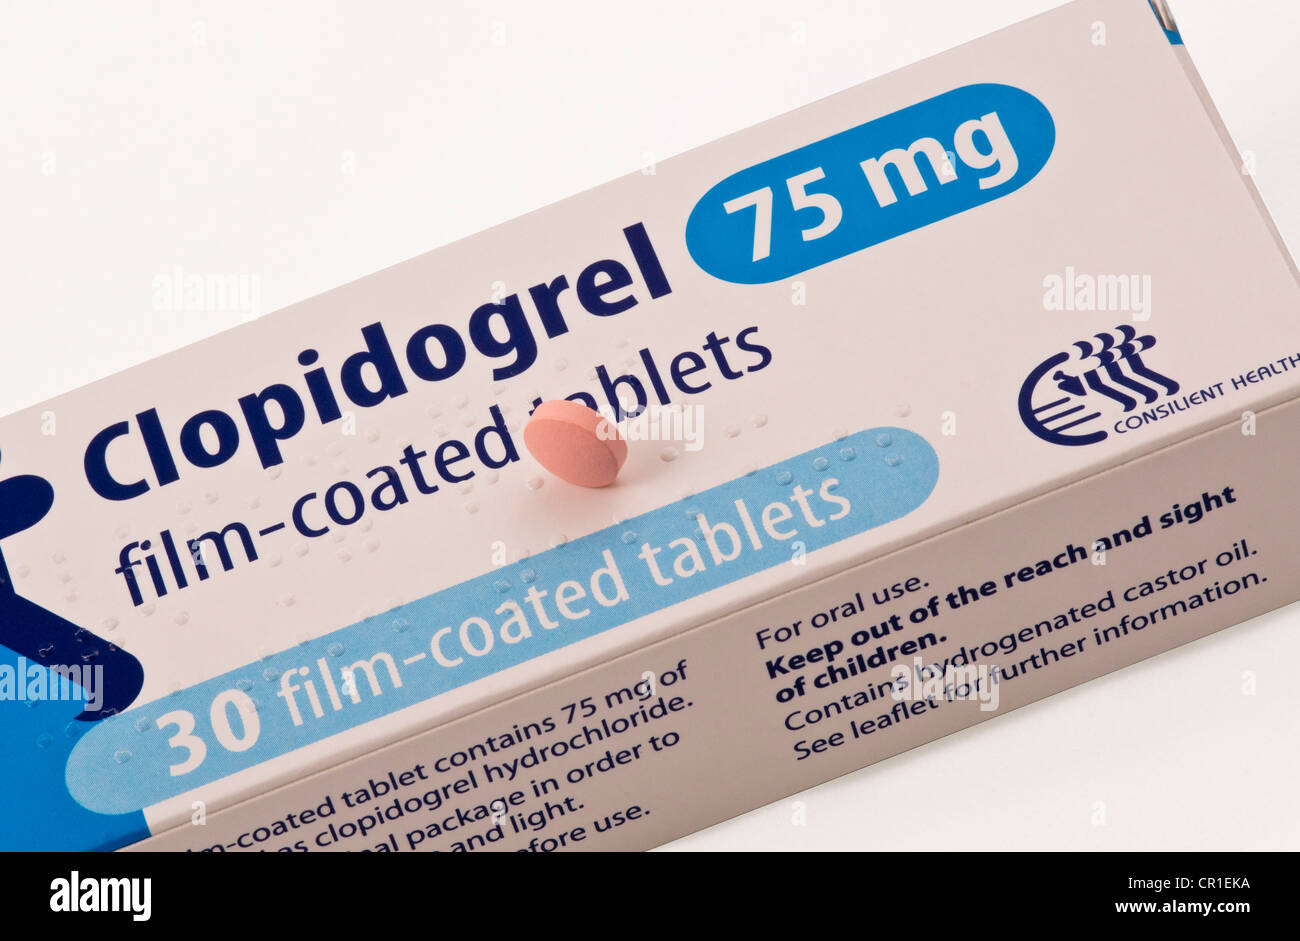 is clopidogrel an expensive drug